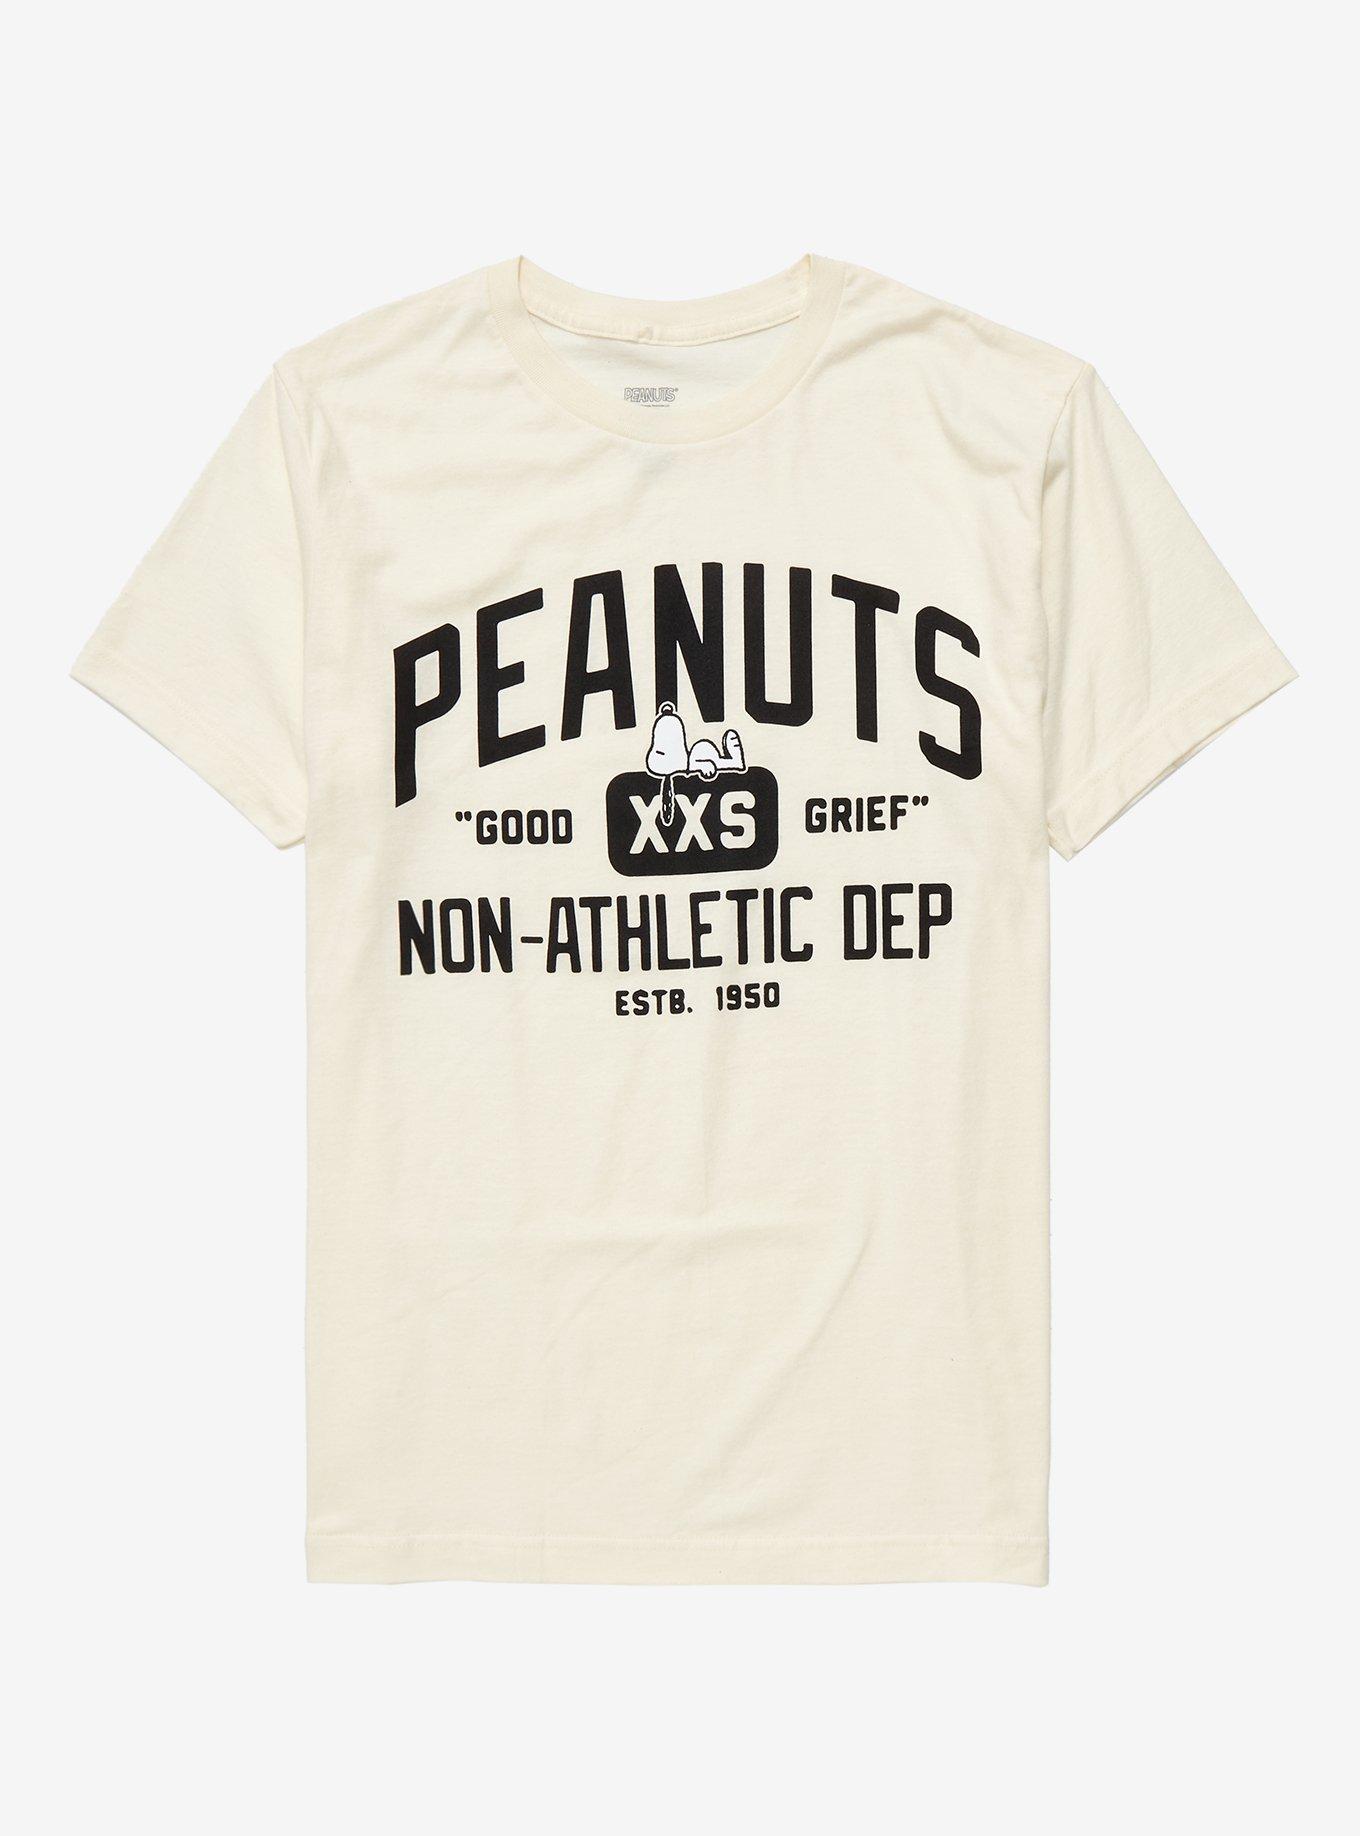 Peanuts Snoopy Exclusive BoxLunch T-Shirt - BoxLunch Department Non-Athletic 